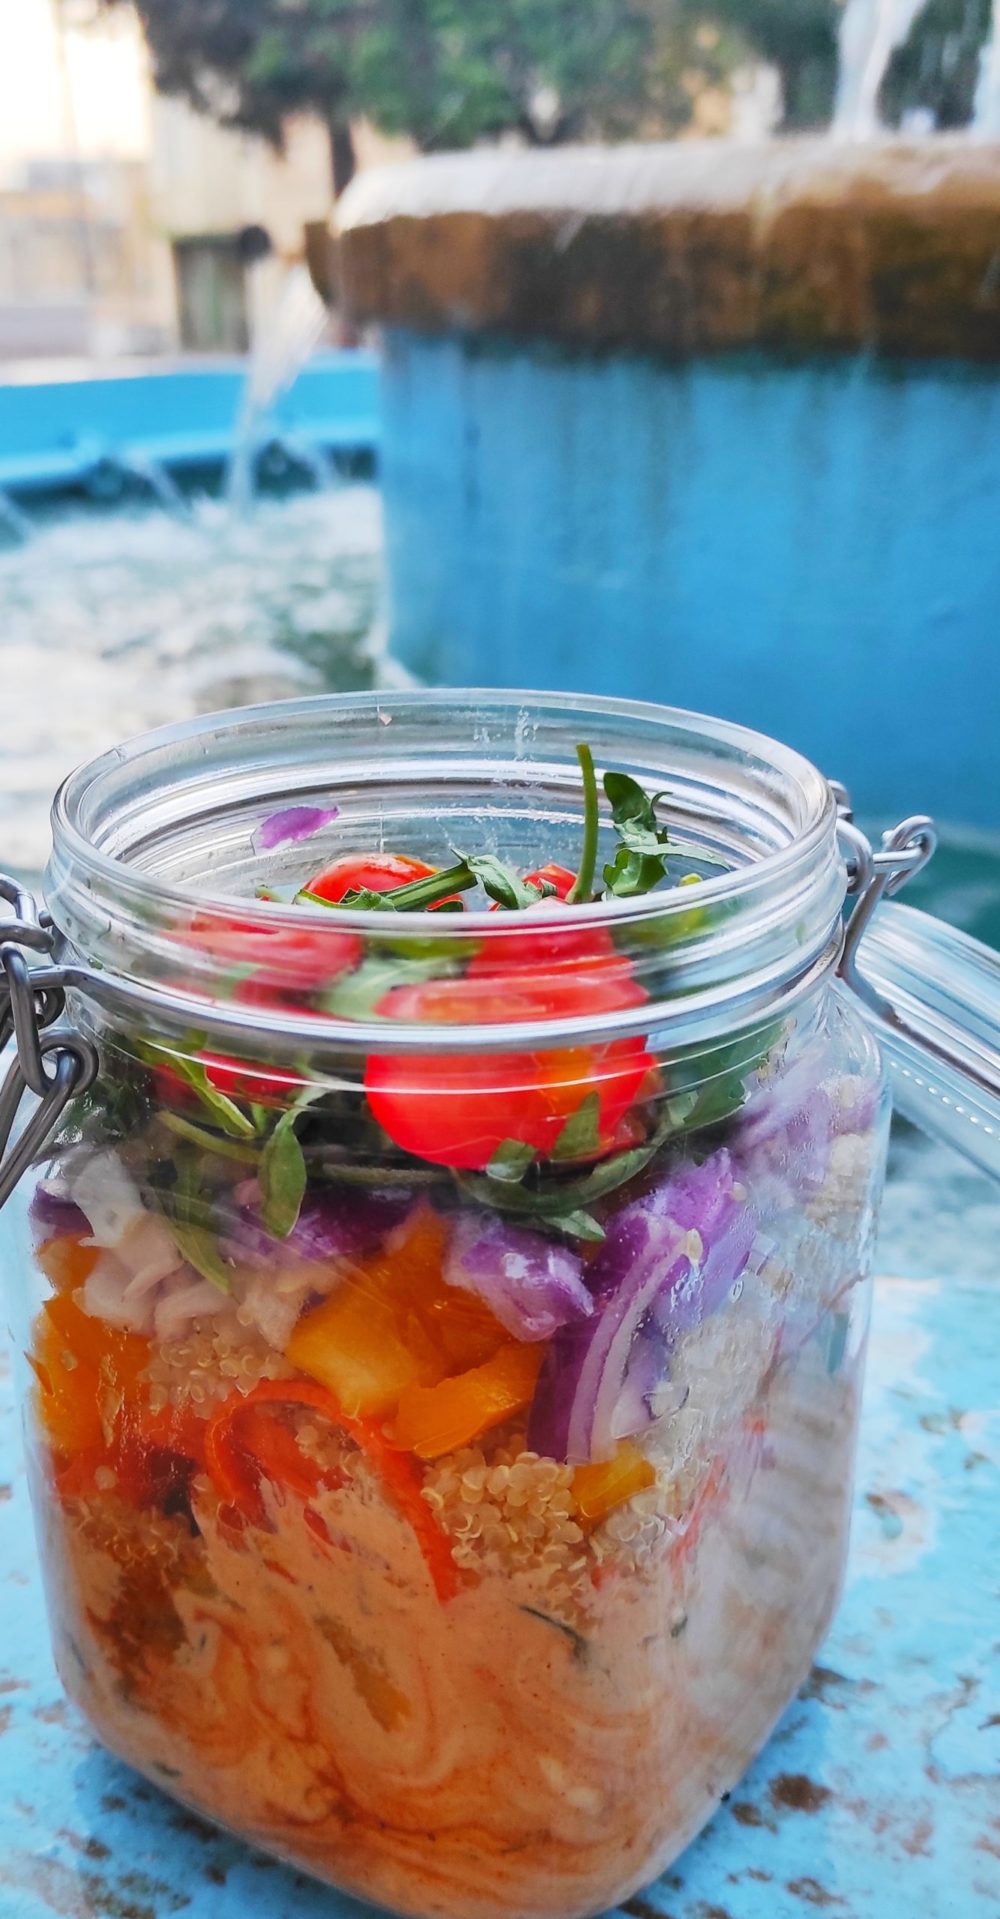 rainbow salad in a mason jar with its lid open. The background shows a blue-painted wall in Malta.